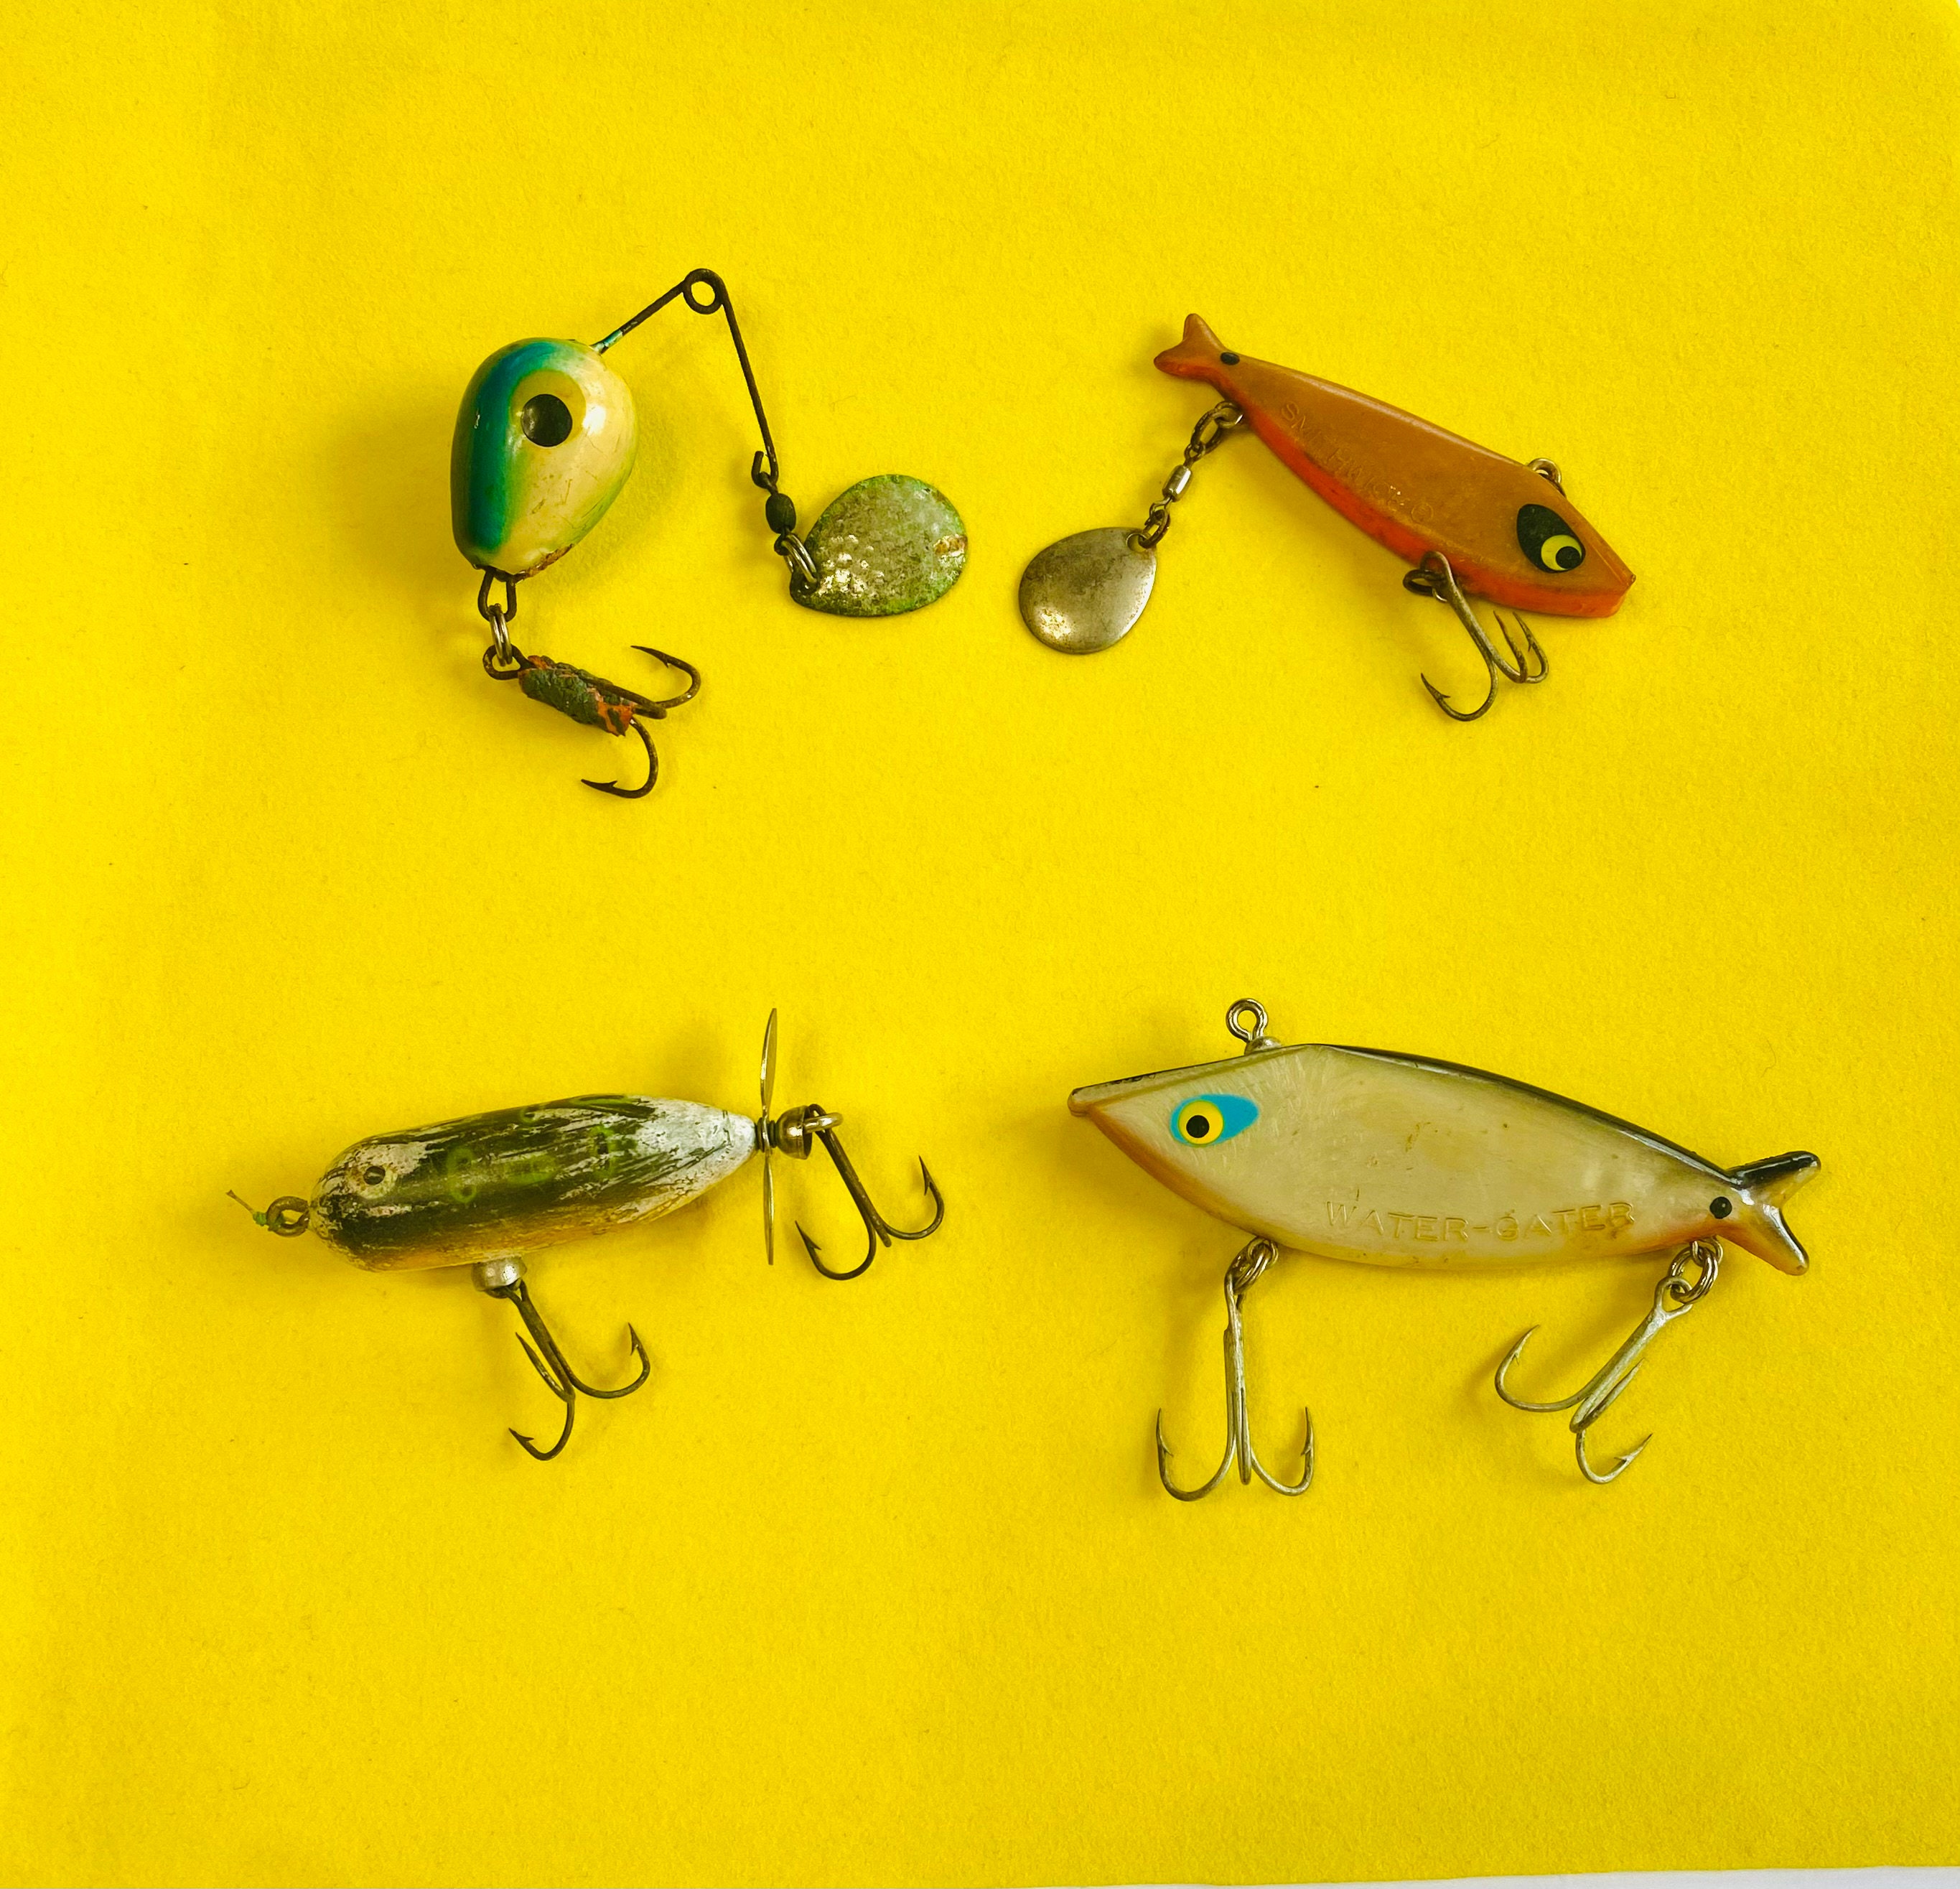 Lot of Four/vintage Fishing Lures, Heddon Lure, Old Tackle, Collectible  Lures, Fishing Lures, Fishing Enthusiast, Smithwick Lures 